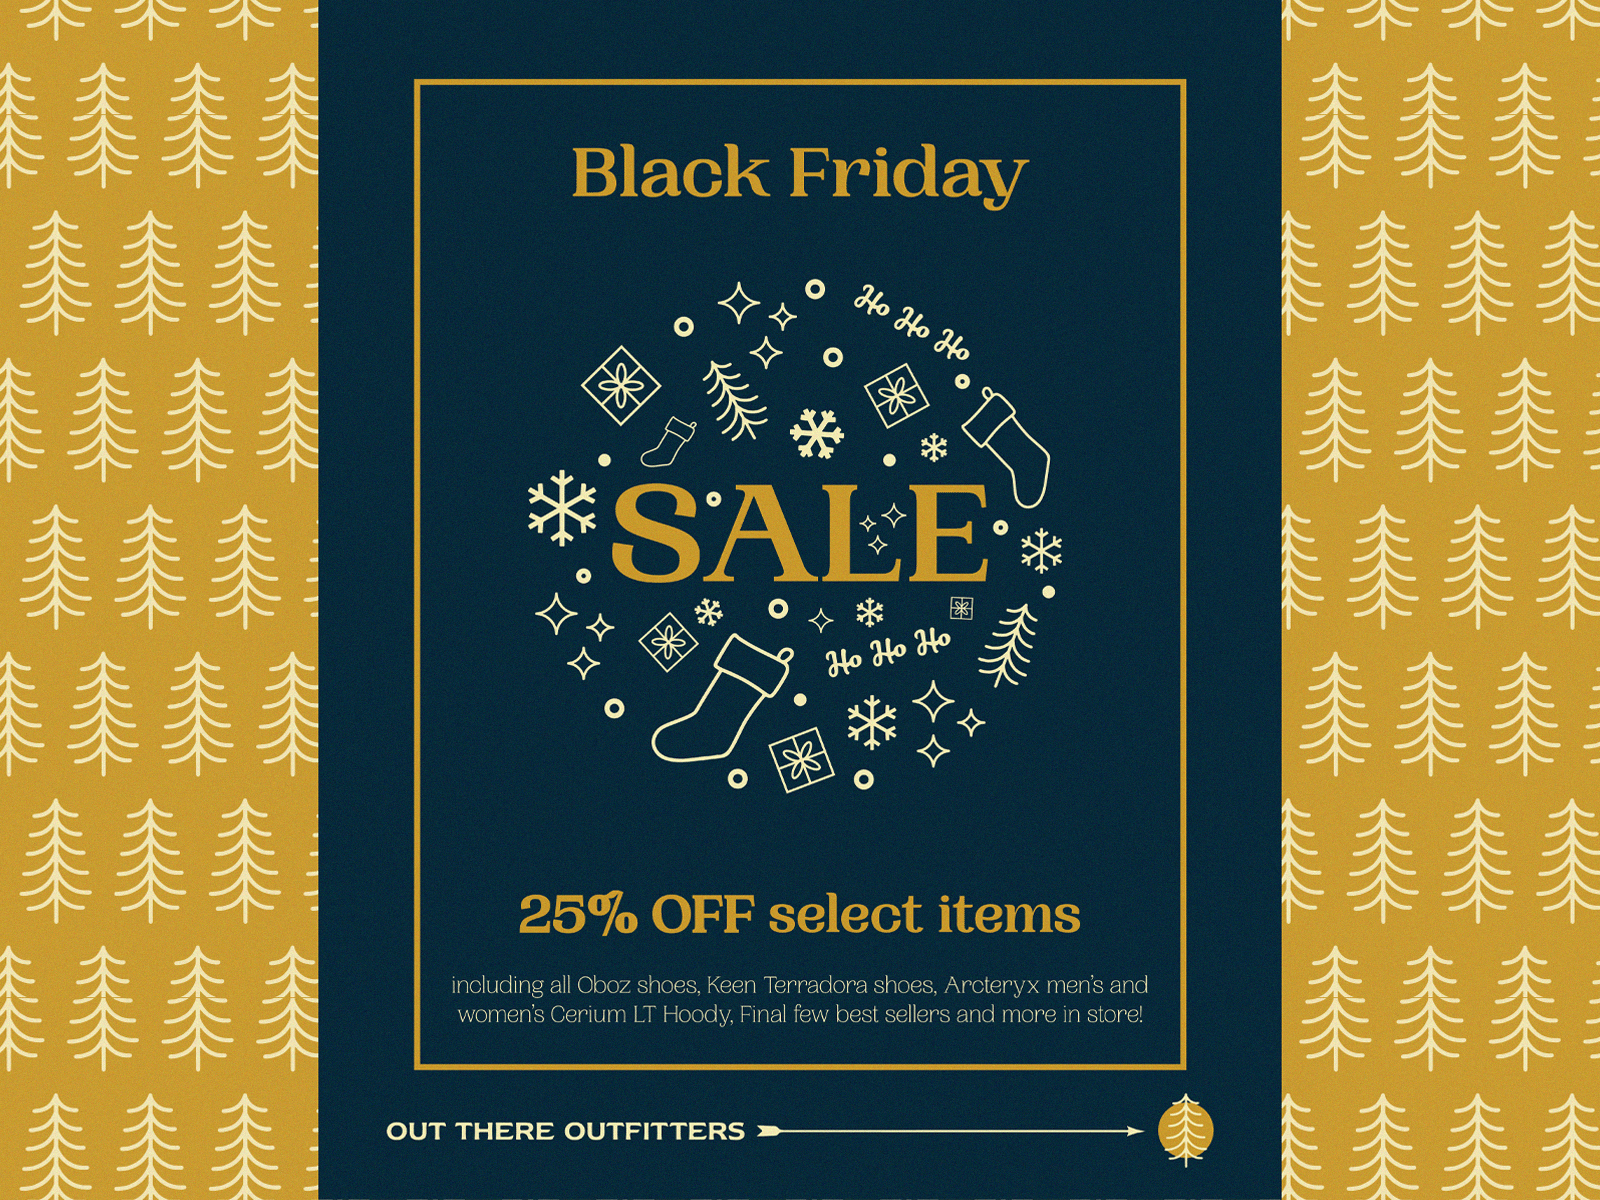 Store Signage/Winter 2019 - Out There Outfitters ad advertising black friday brand design branding branding design christmas graphic design illustration illustrator logo logo design outdoor poster retail sale signage winter